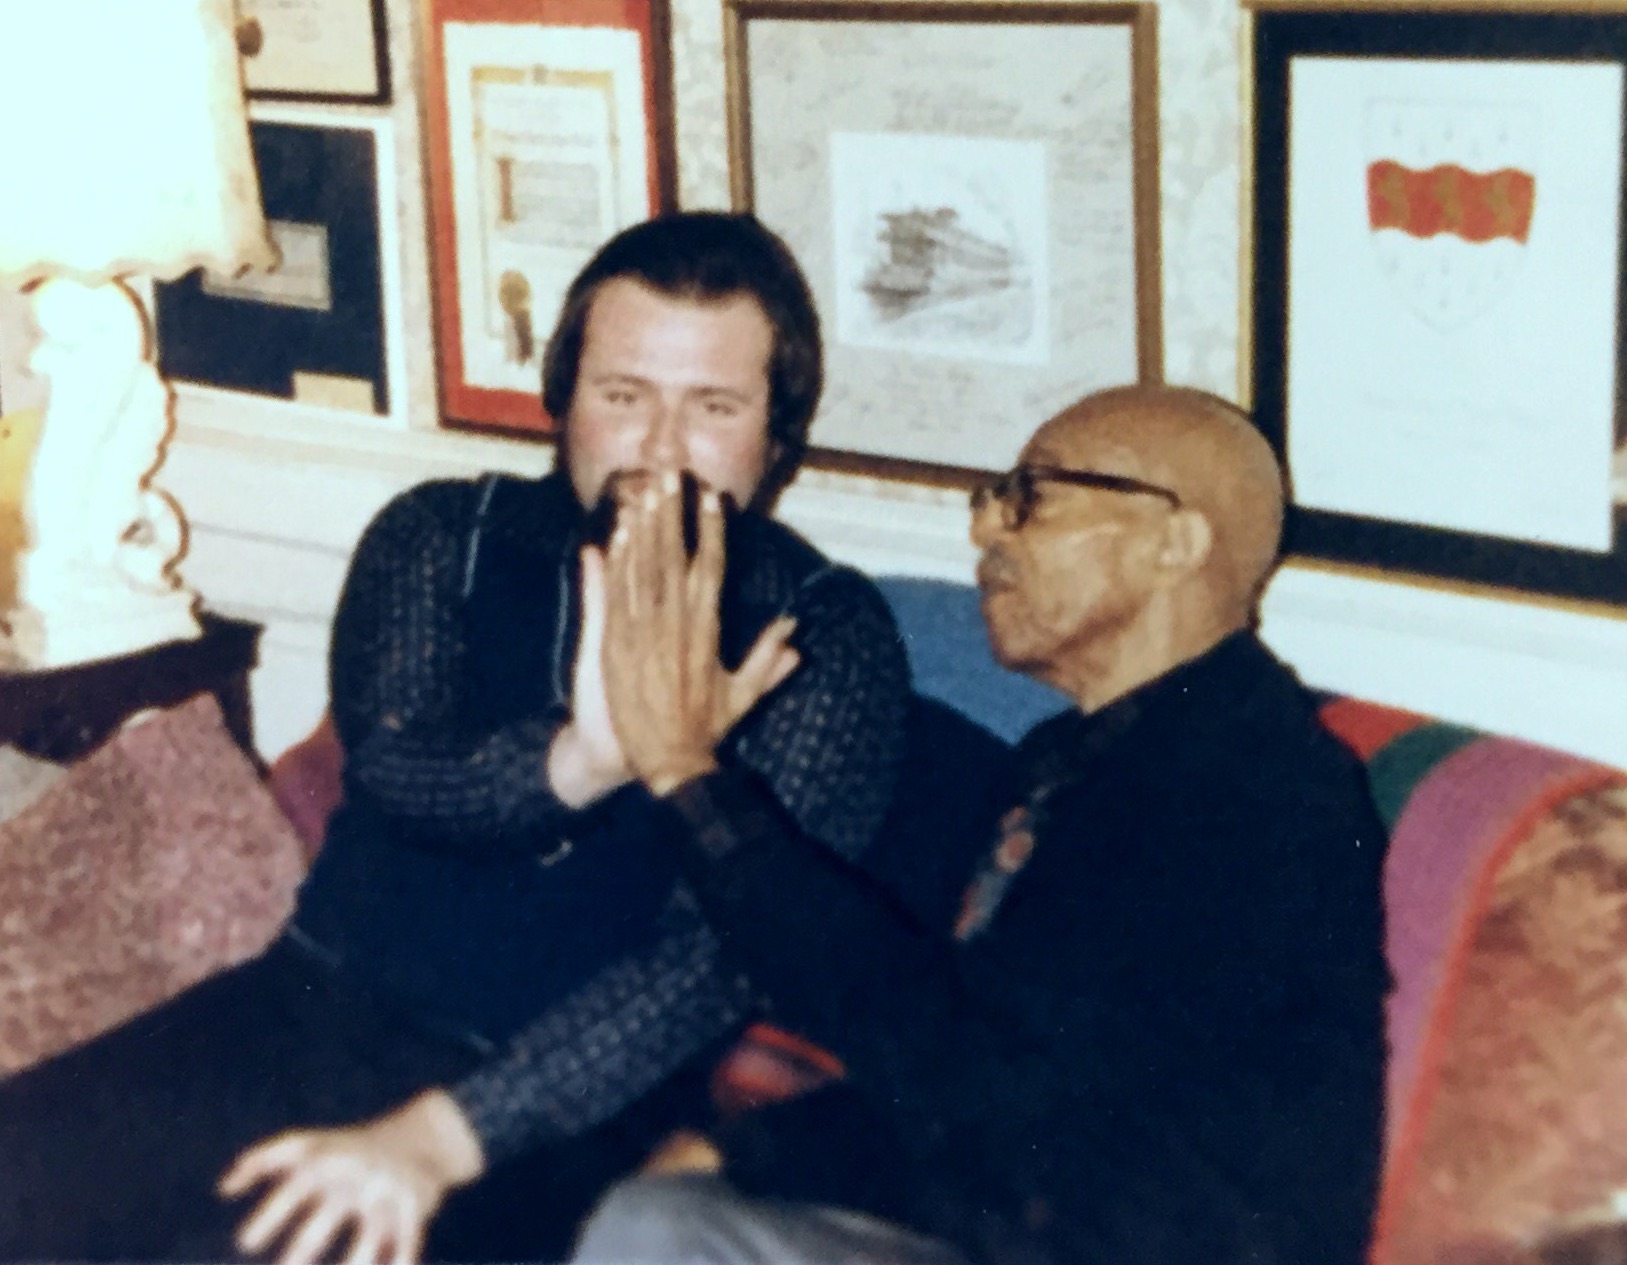 Eubie Blake and I 
comparing hand spans
